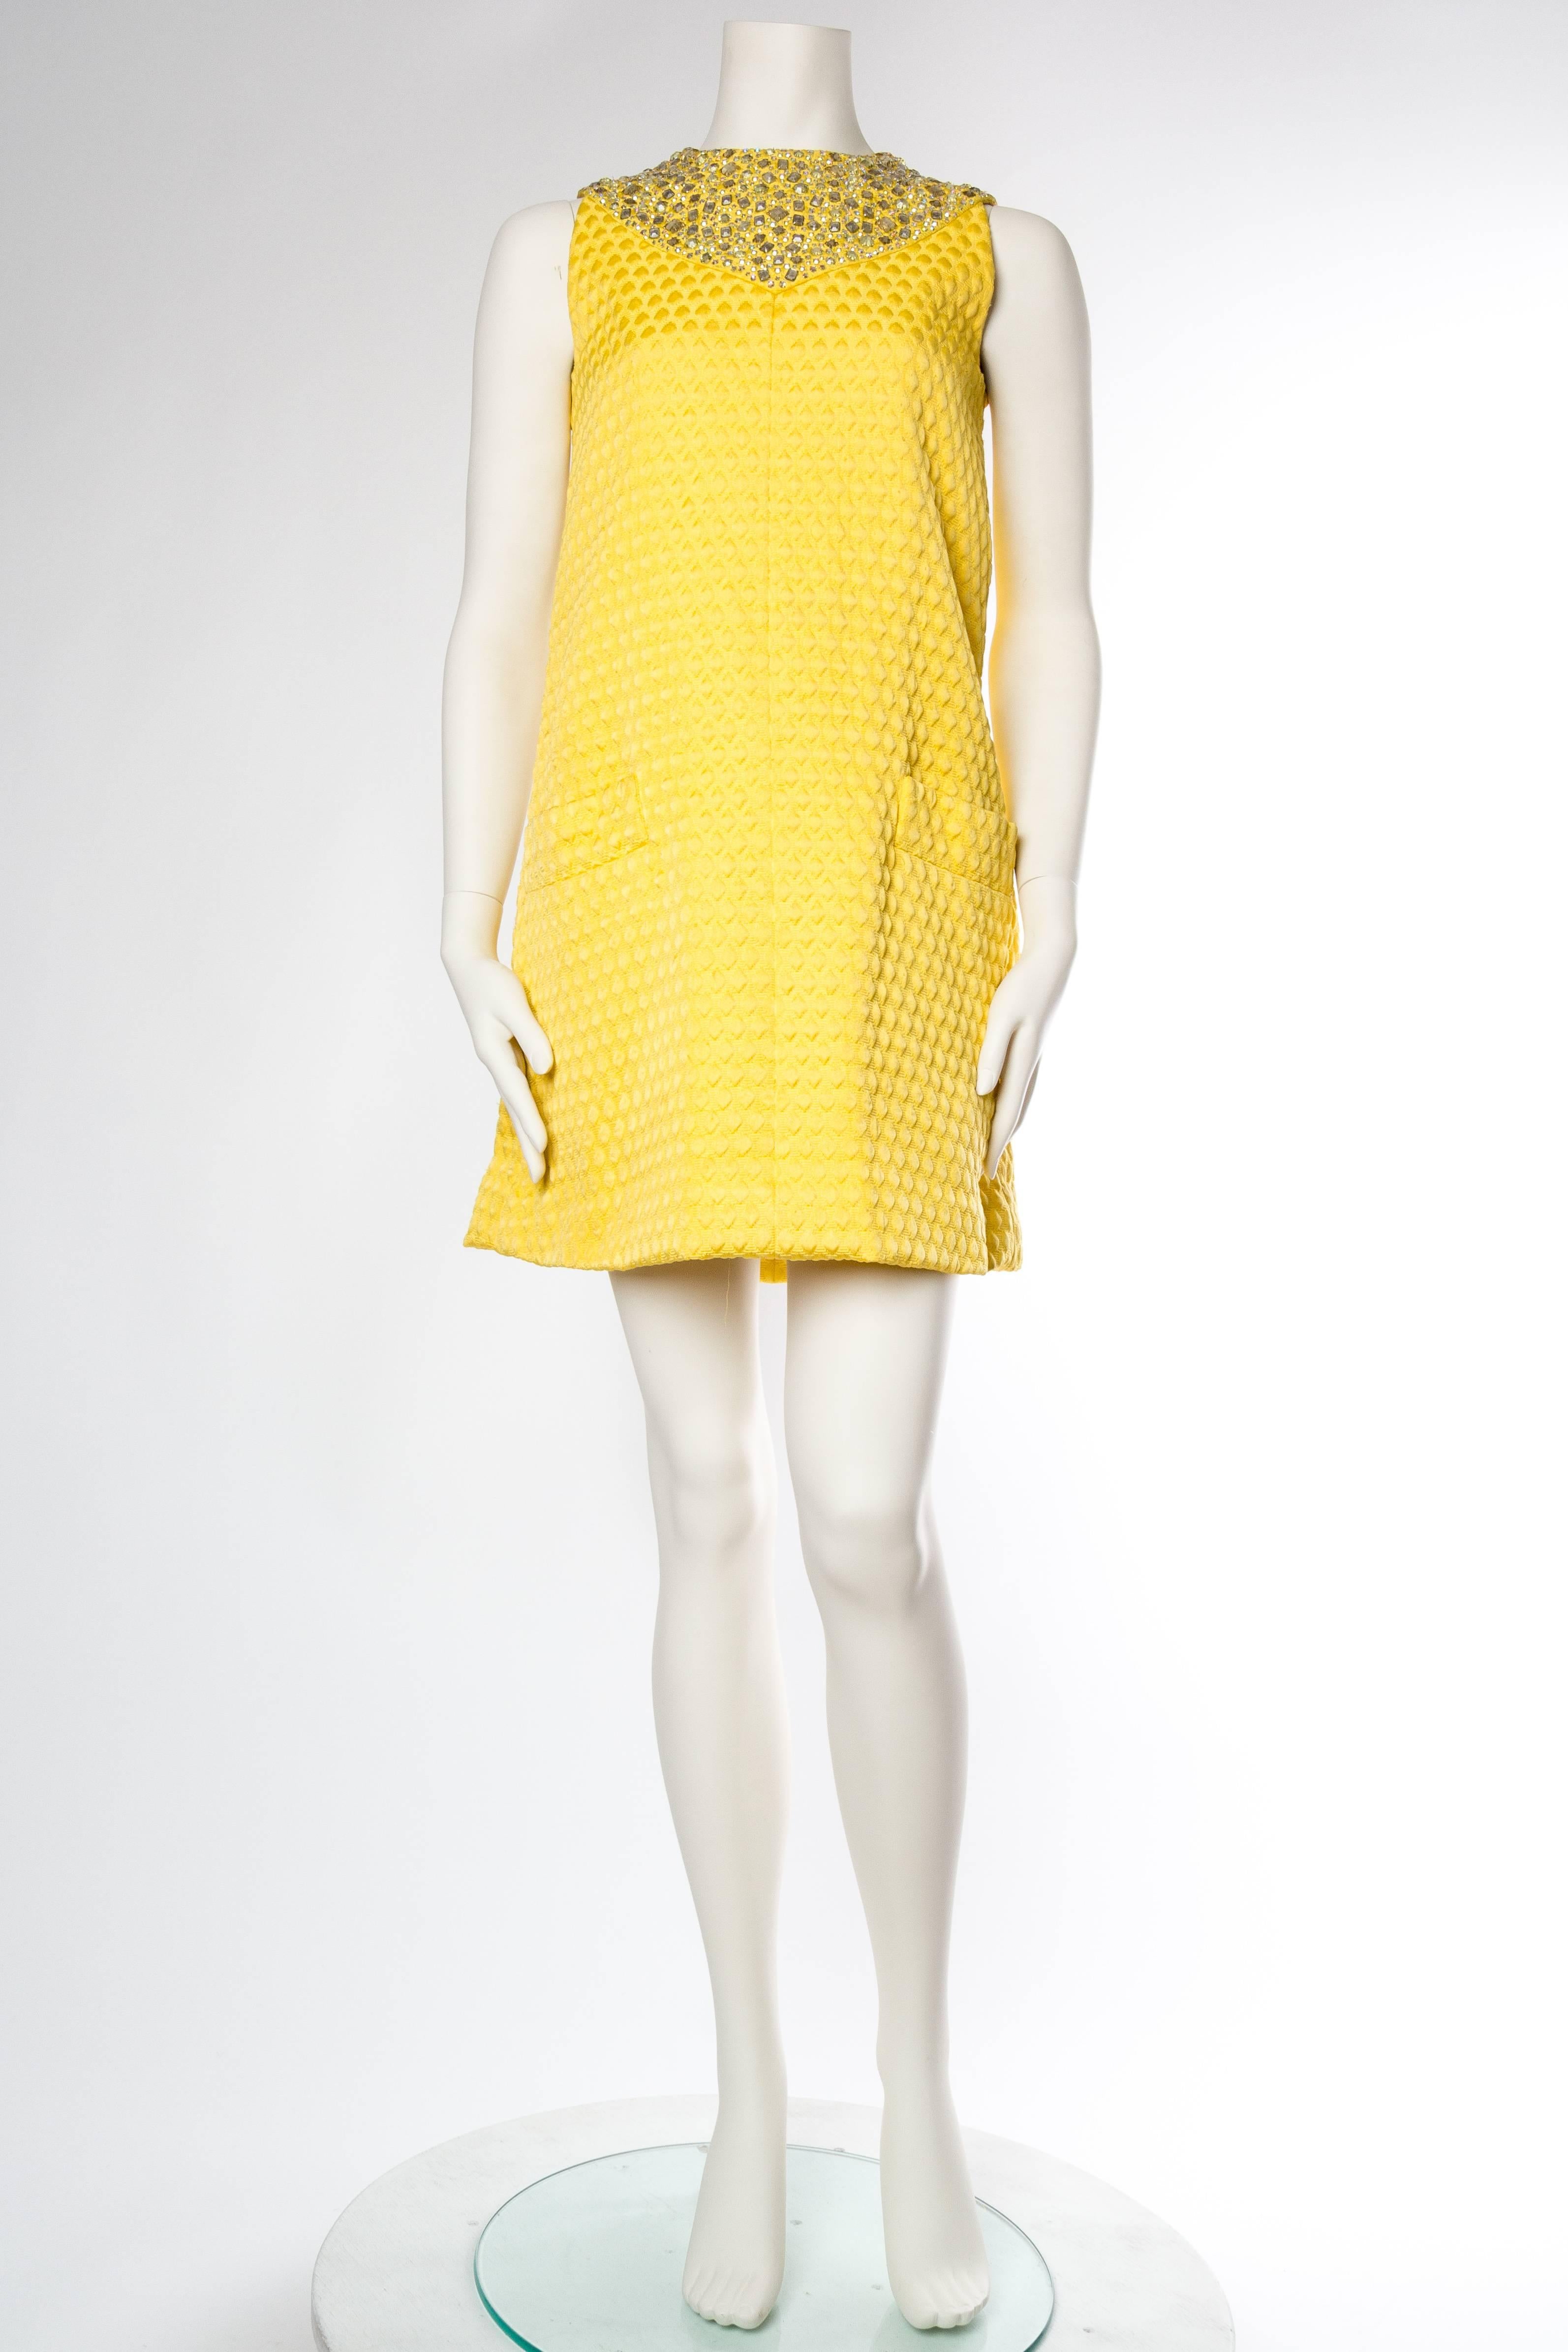 1960 OSCAR DE LA RENTA Yellow Geometric Rayon Blend Matelassé Cocktail Dress Wi In Excellent Condition In New York, NY